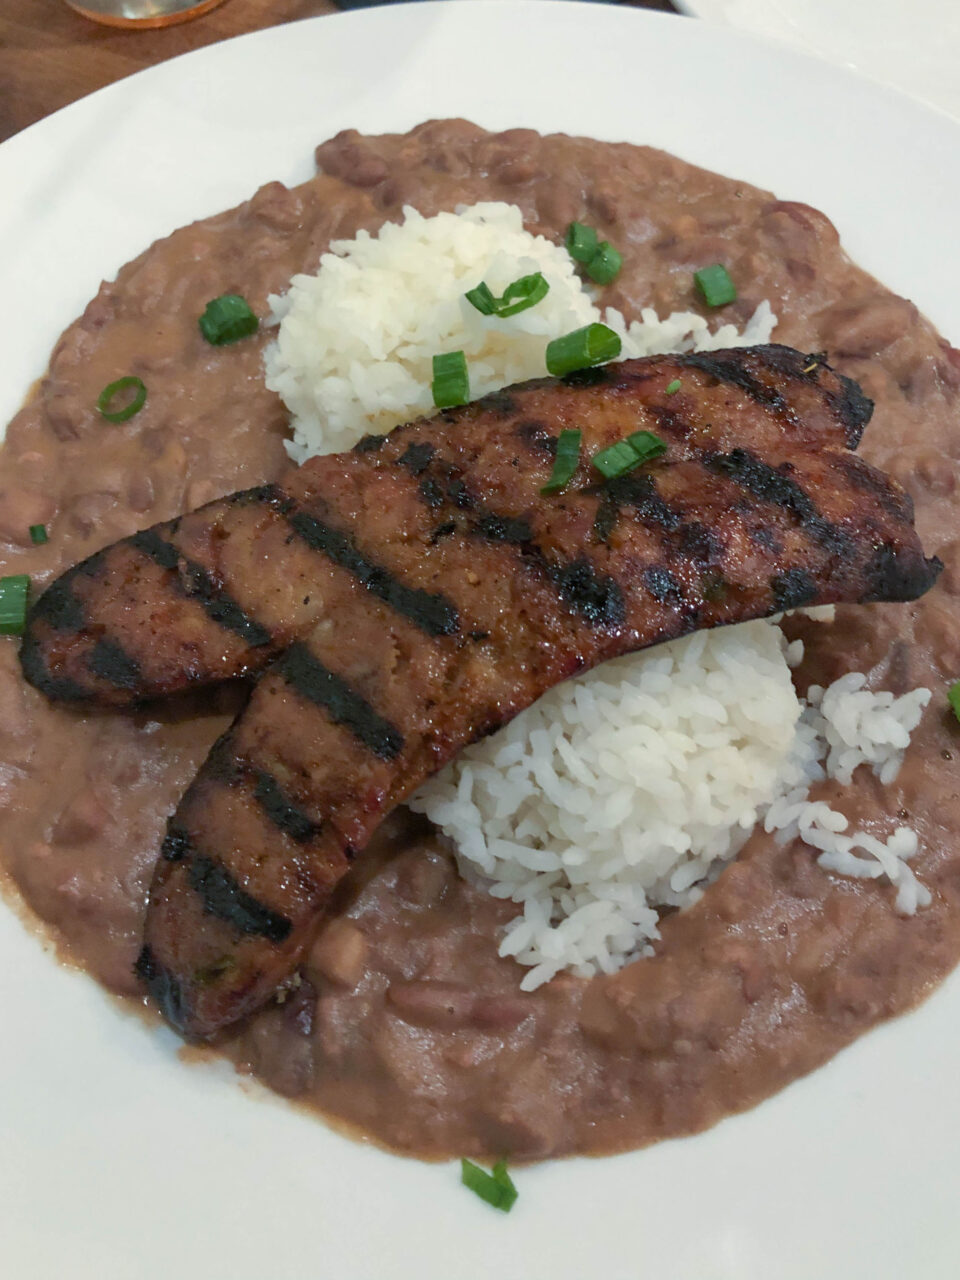 Red beans and rice, this one topped with sausage, is a Louisiana Cajun staple.